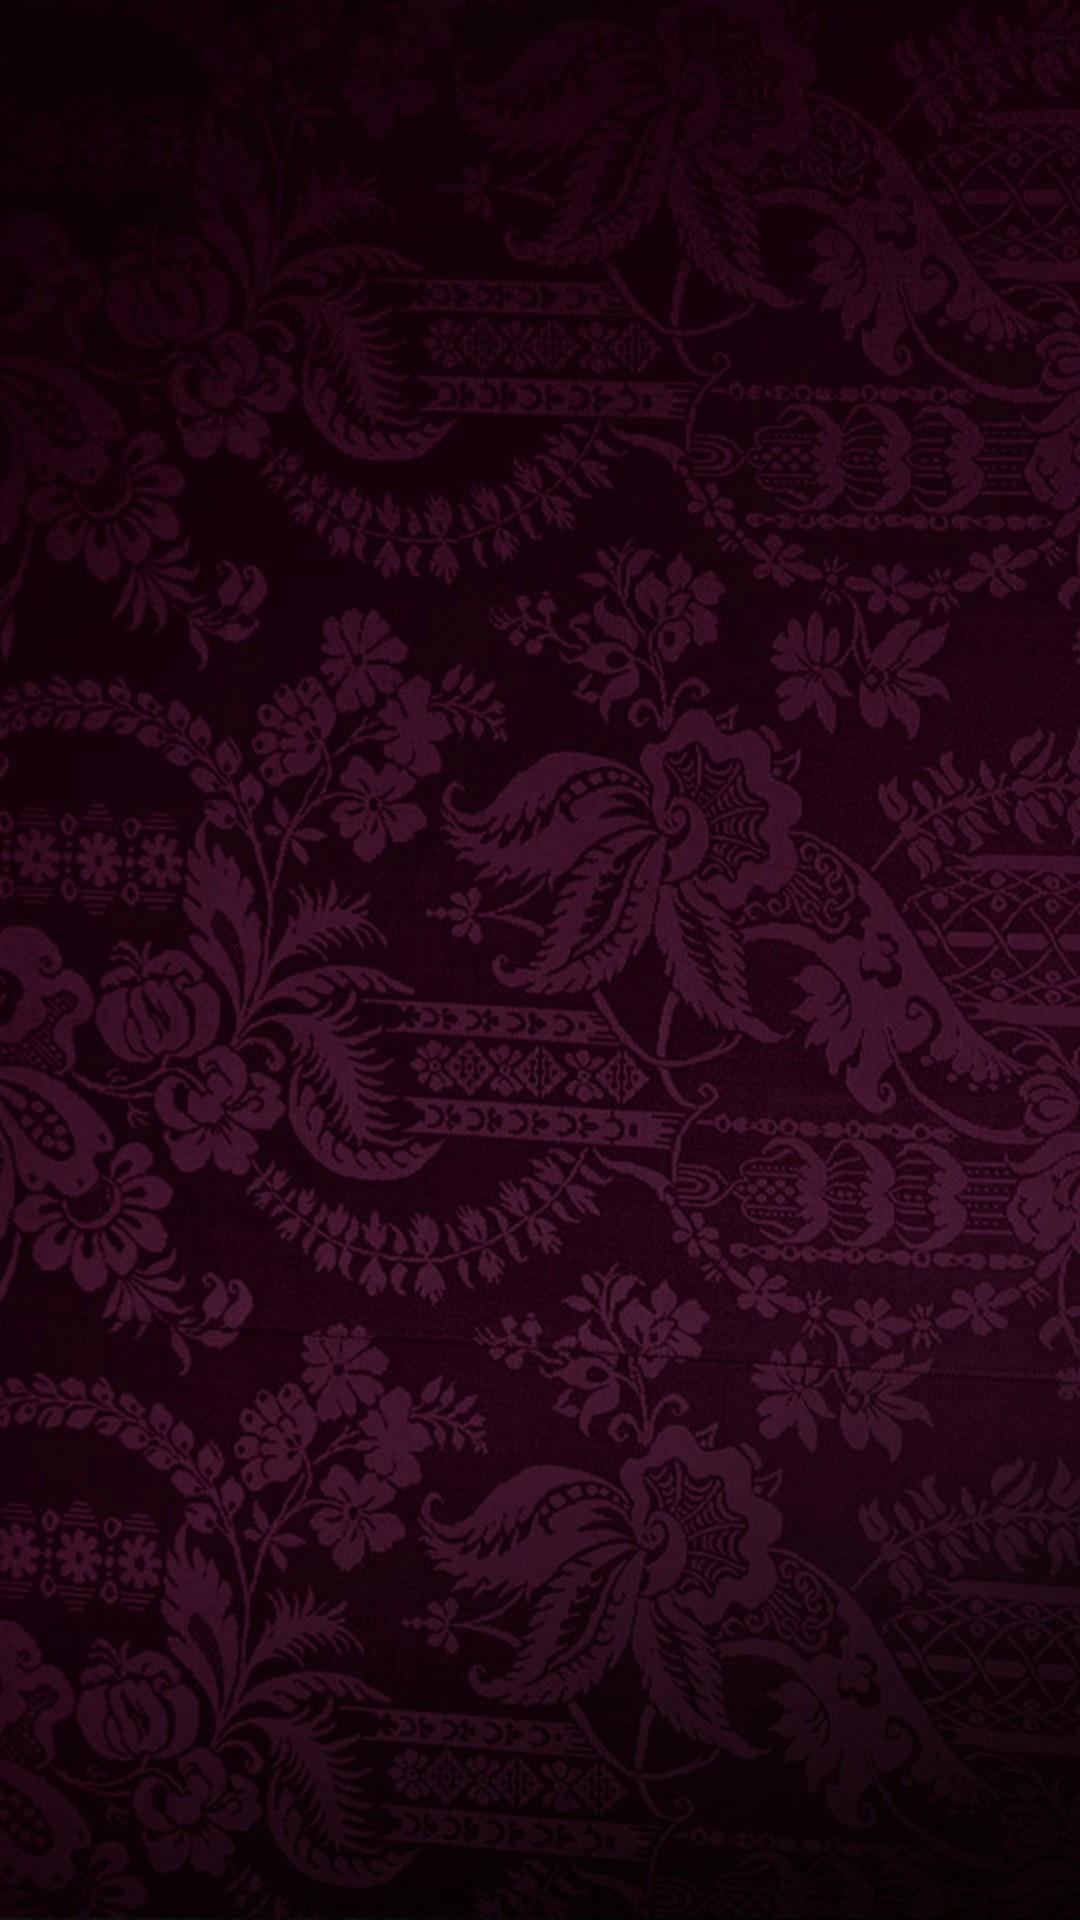 vintage floral wallpaper for iphone 5 New iPhone 5